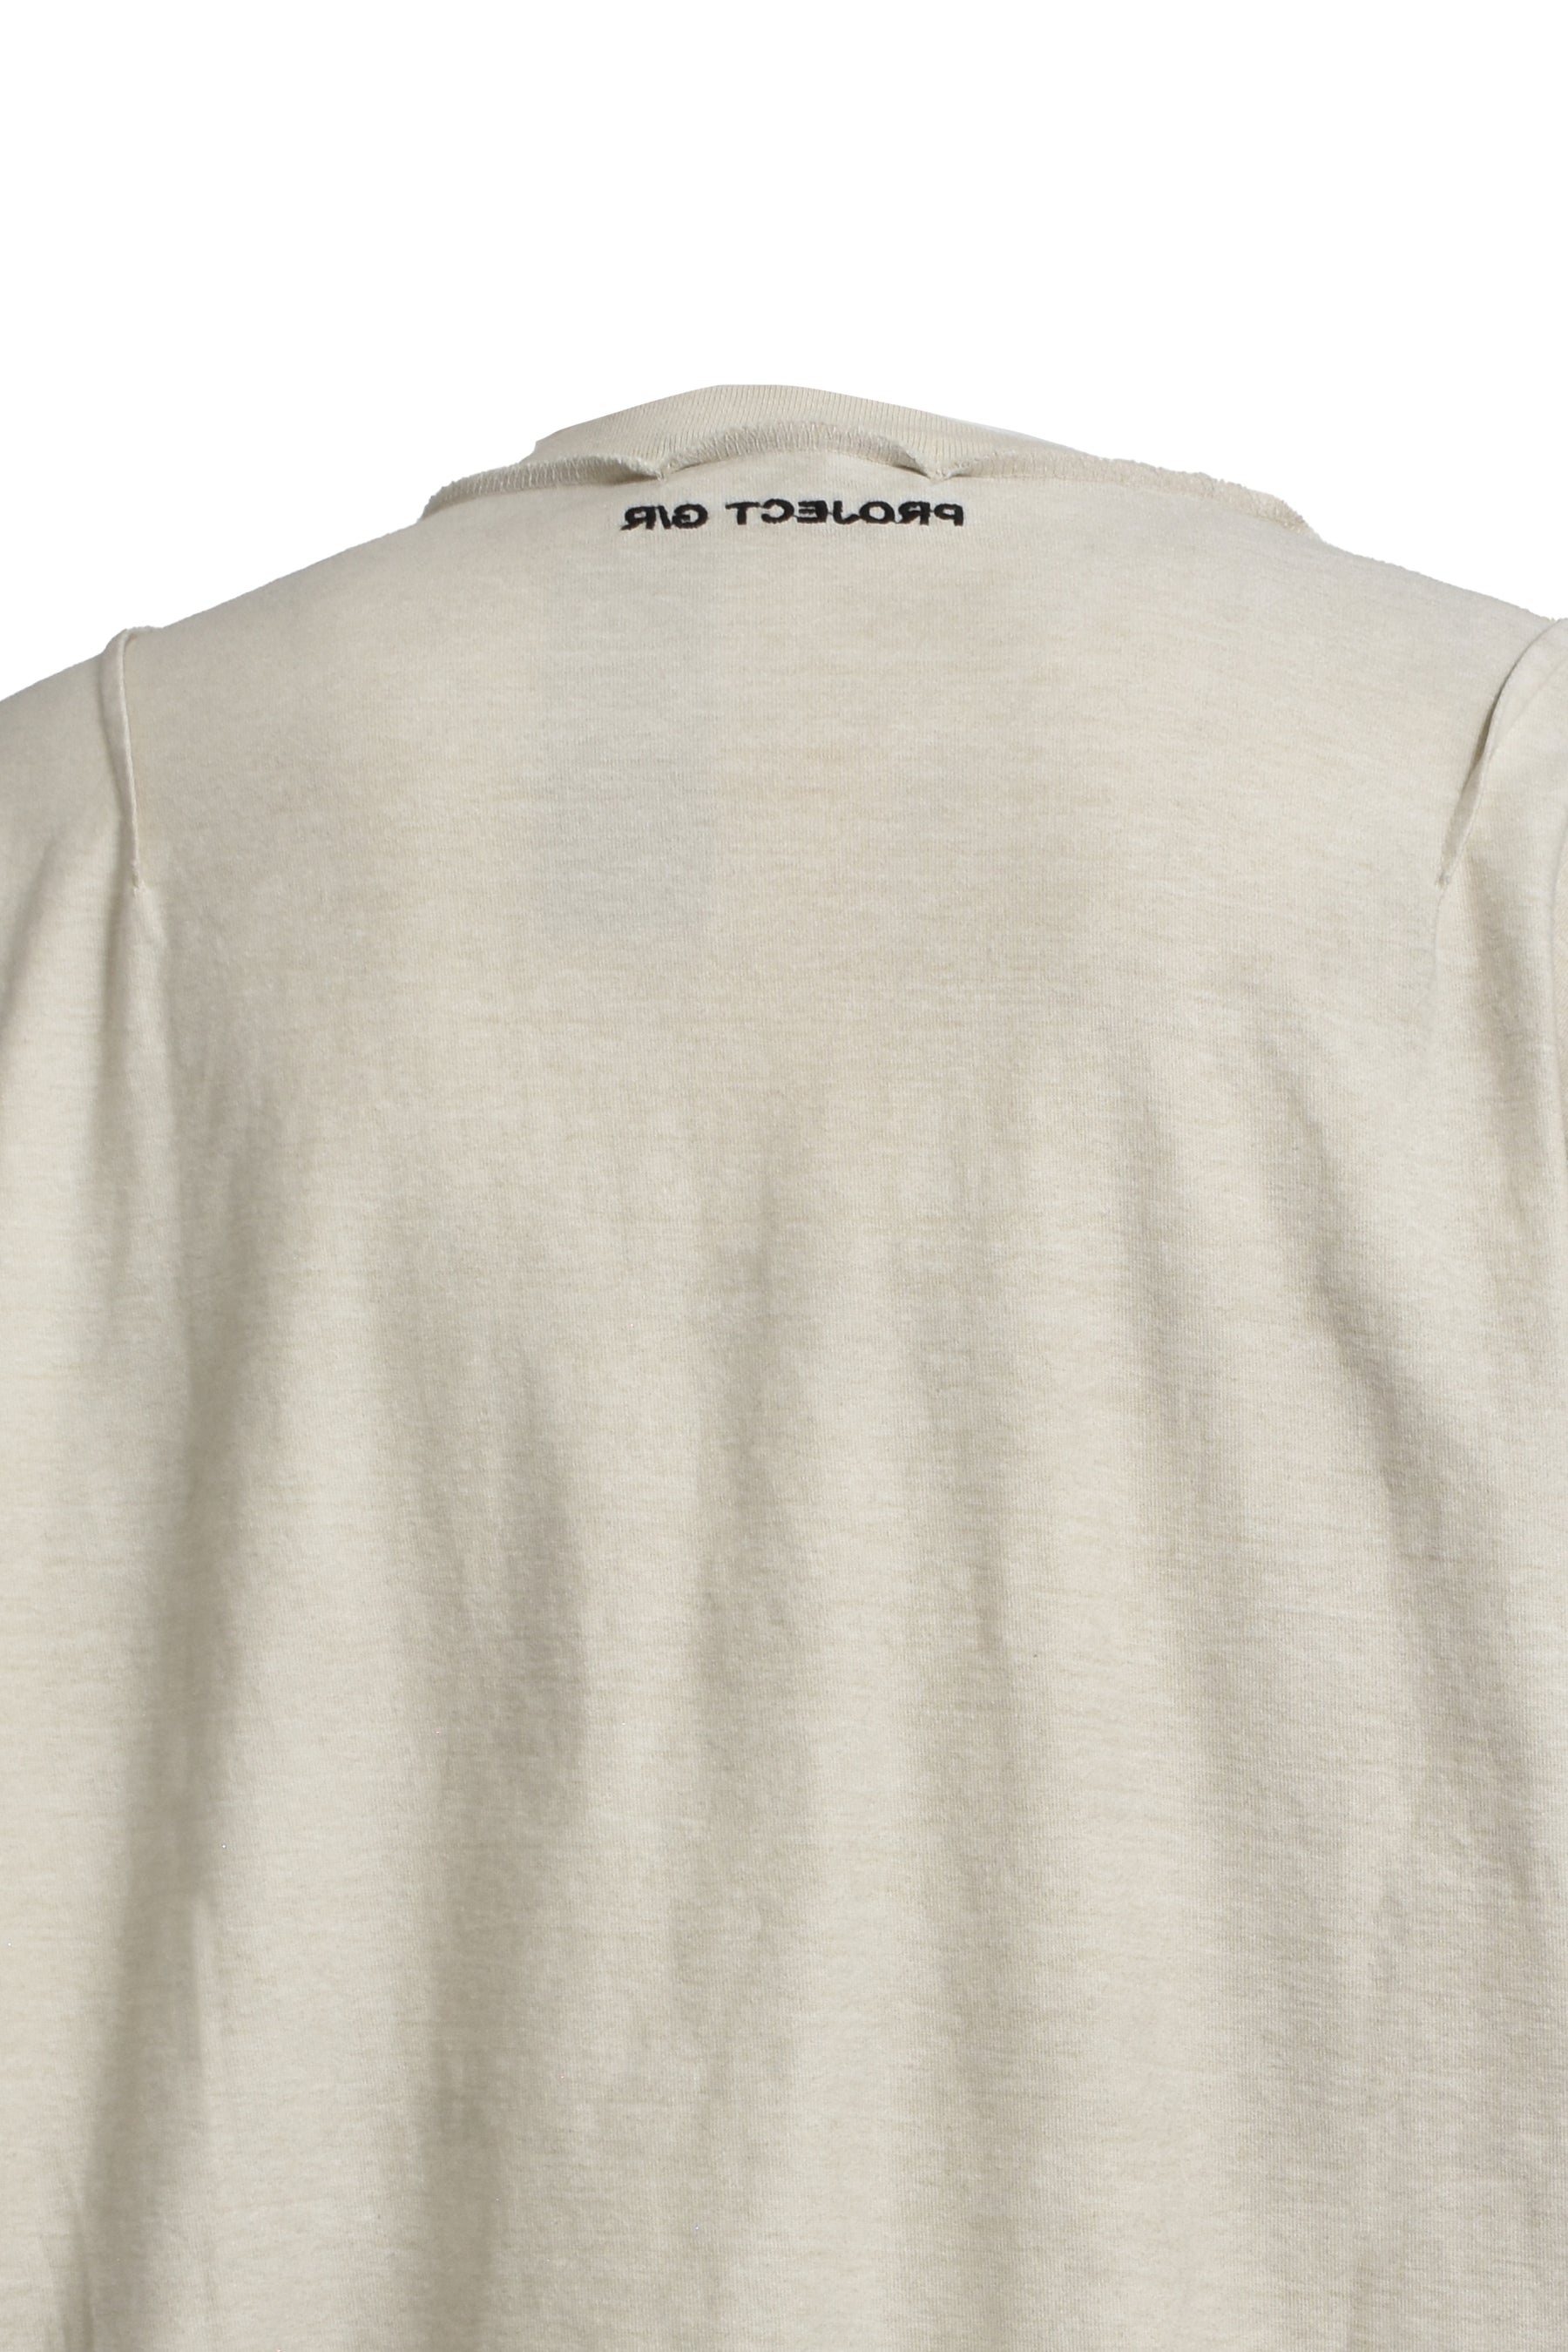 INSIDE OUT LONG SLEEVE / GRY